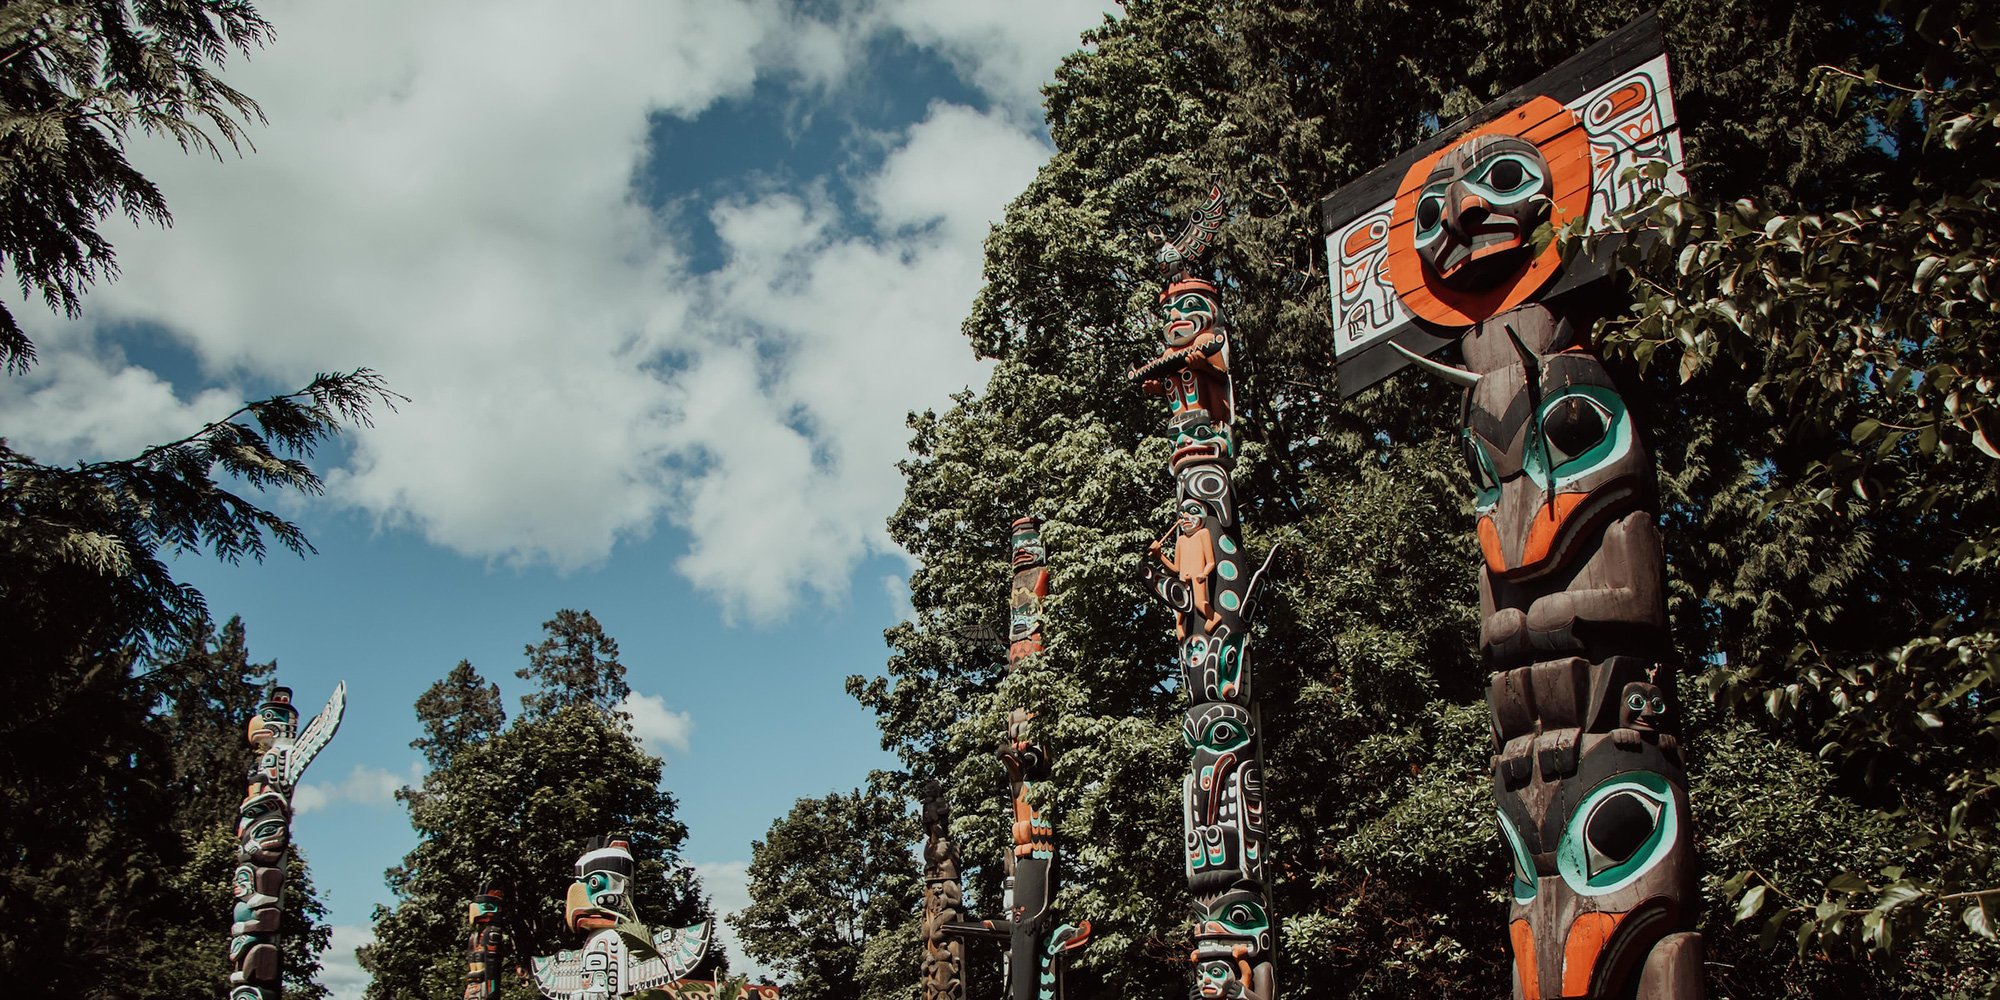 Debunking Misconceptions About First Nation Totem Poles